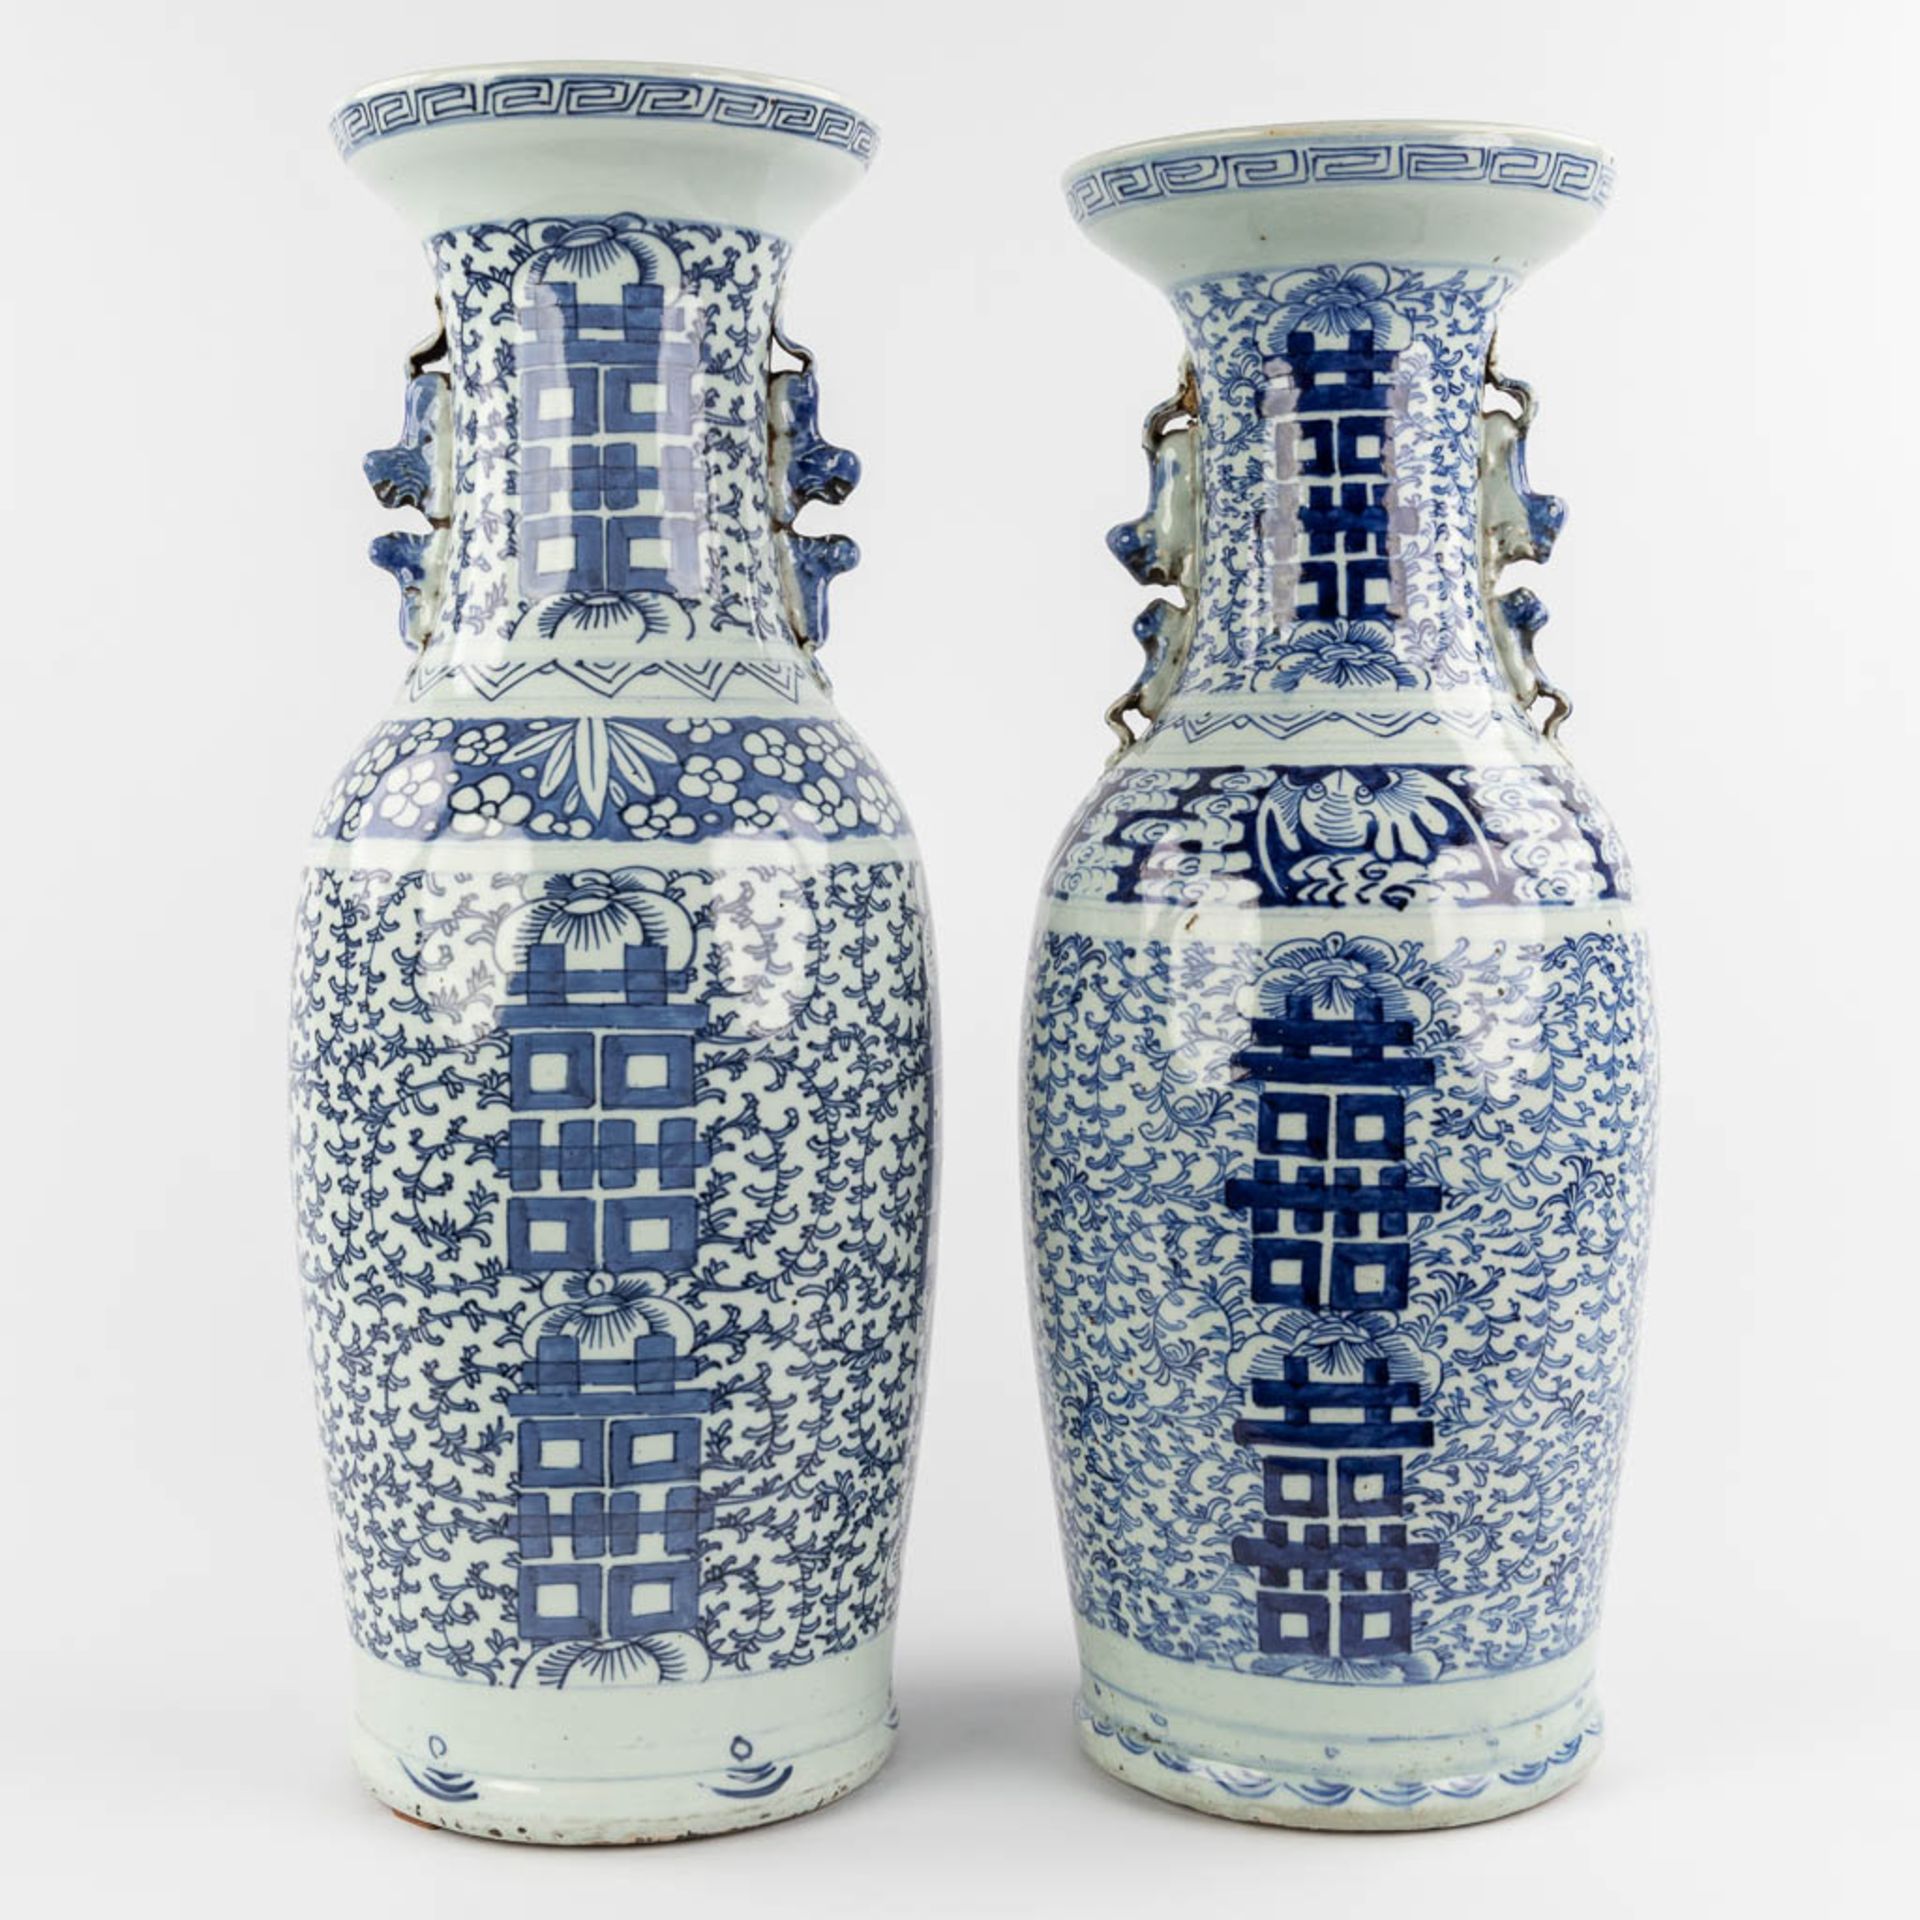 Two Chinese vases with blue-white double xi-sign of happiness. 19th/20th C. (H:60 x D:21 cm)